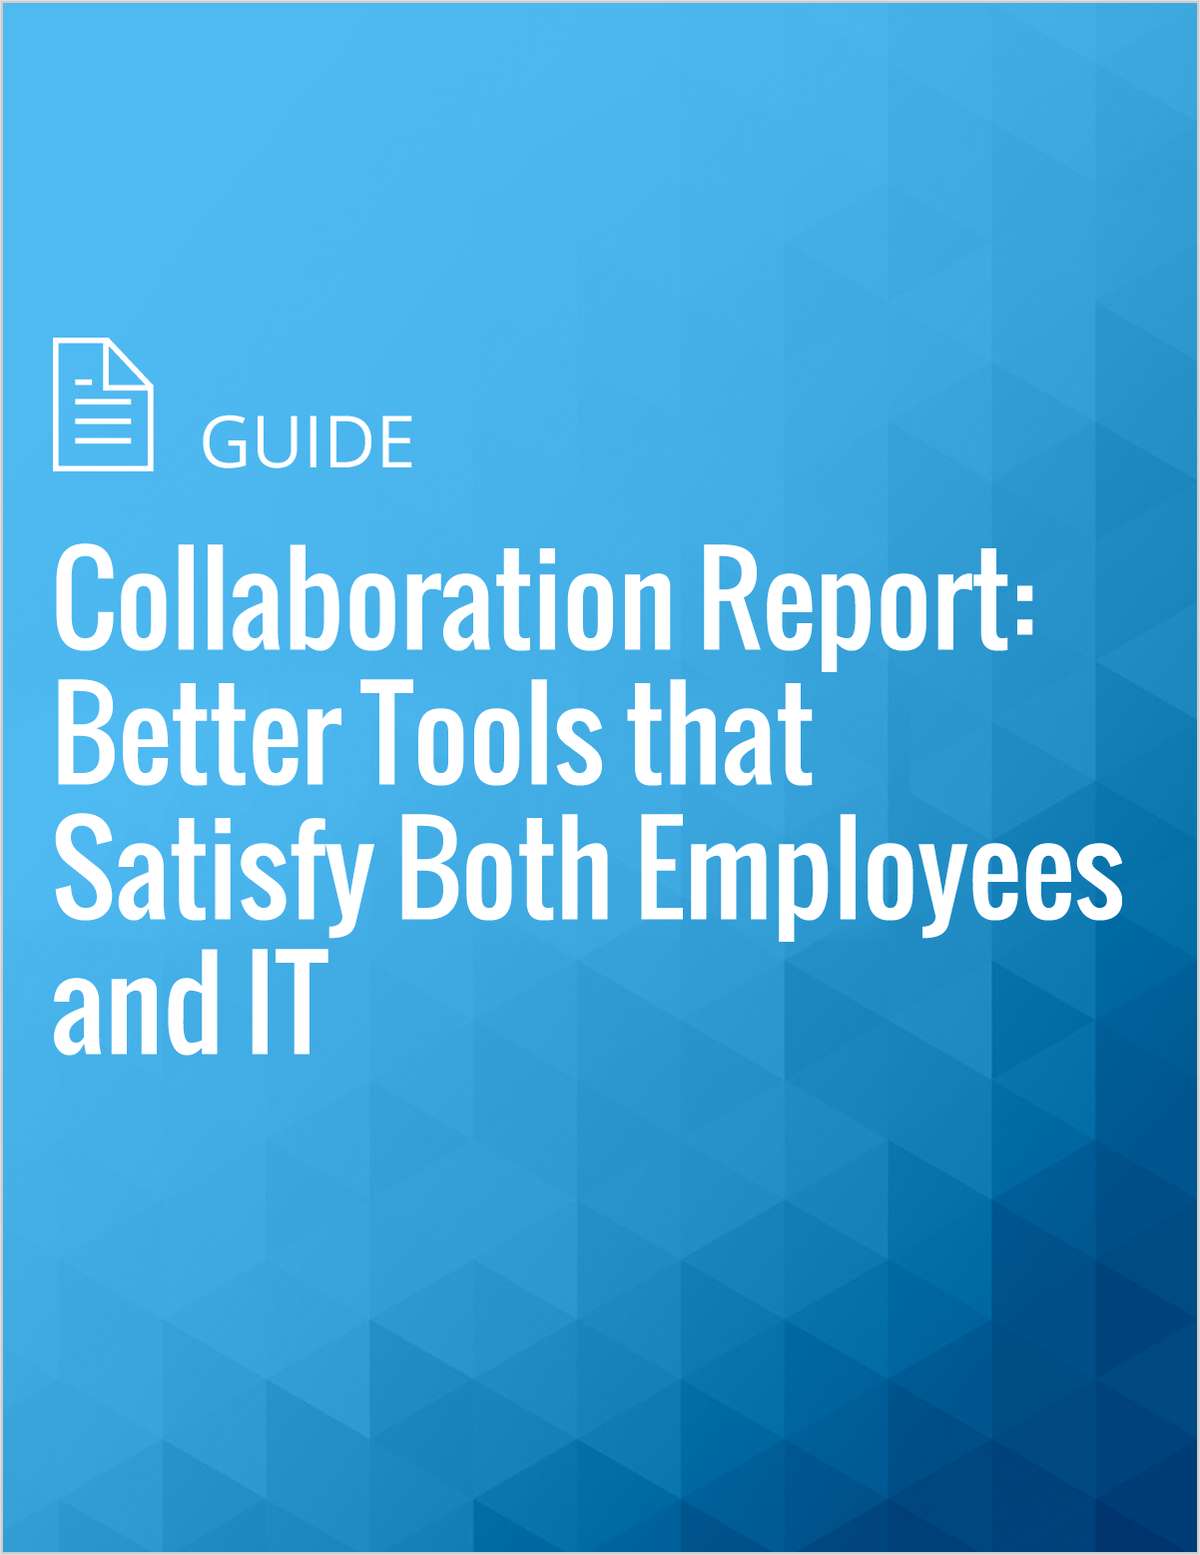 Collaboration Report: Better Tools that Satisfy Both Employees and IT